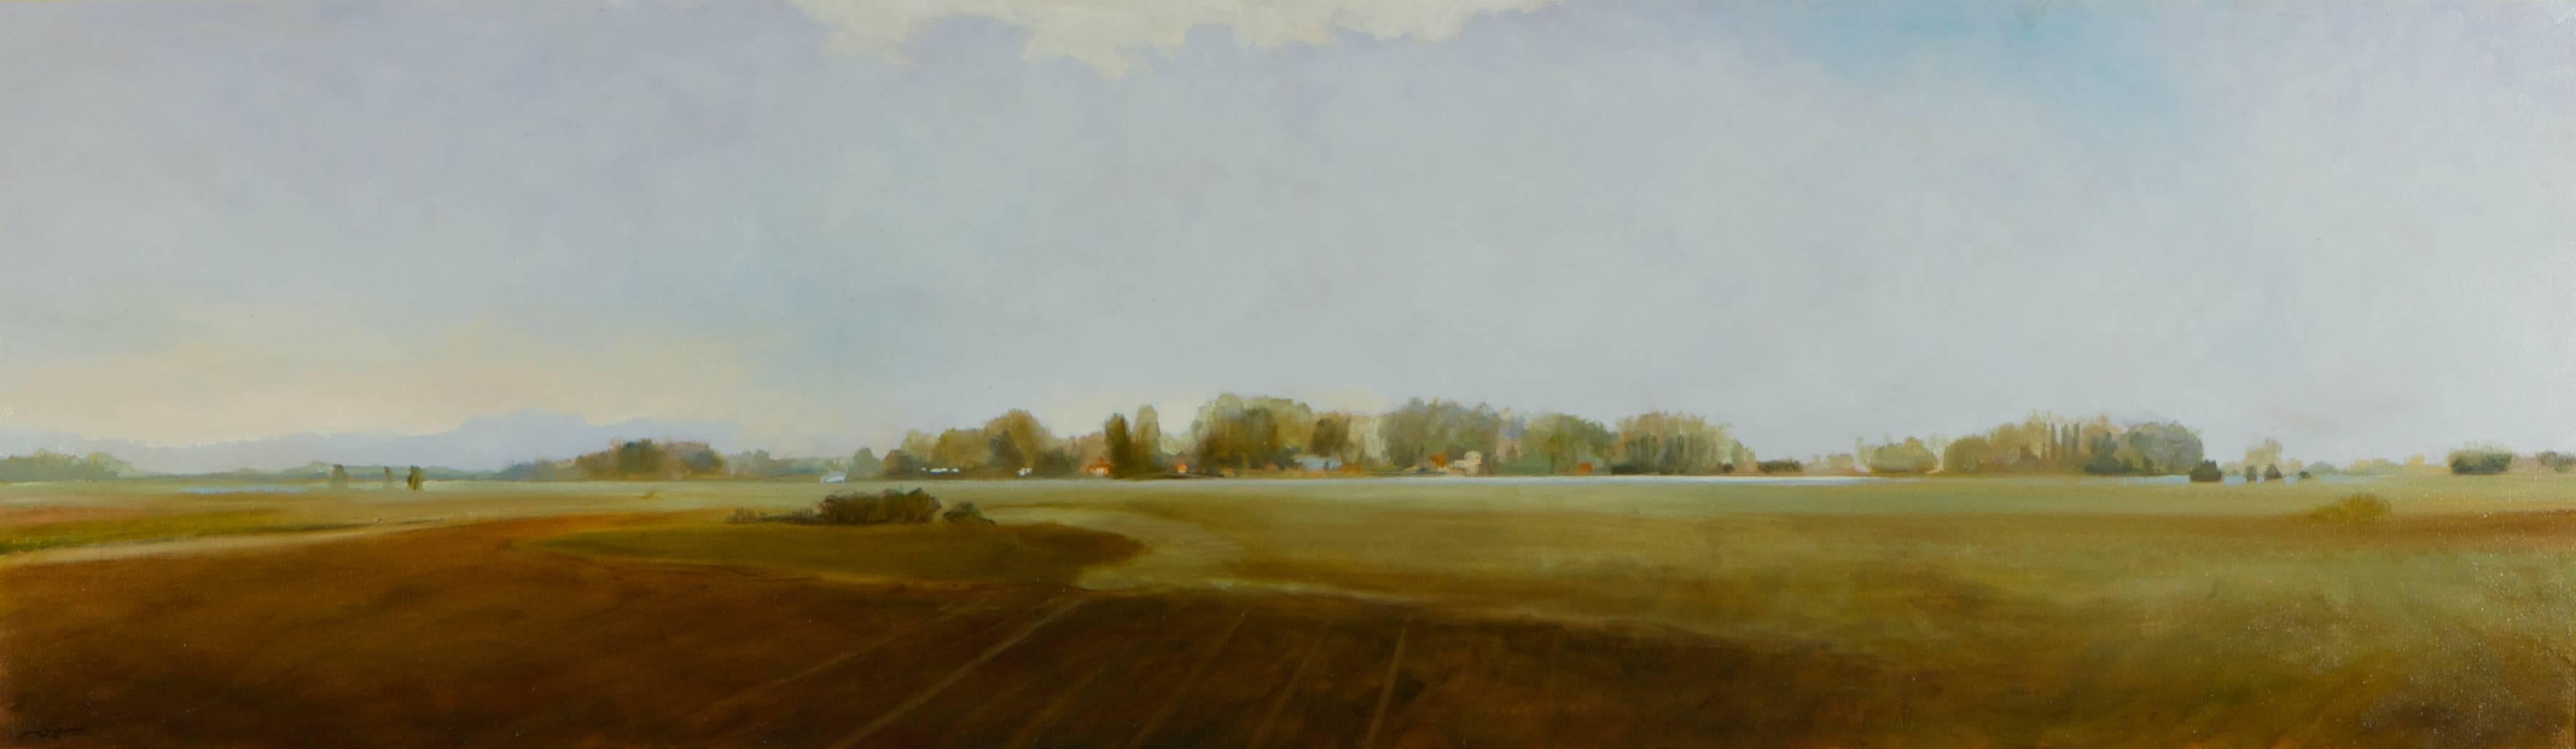 Robert Reynolds, &quot;Near Utrecht&quot;, Oil on linen on panel, 24&quot; x 80&quot;
Framed dimensions are: 27.5&quot; x 83.5&quot;. Please contact us for framing details.

&quot;Near Utrecht&quot; is one in Robert Reynolds' 2013